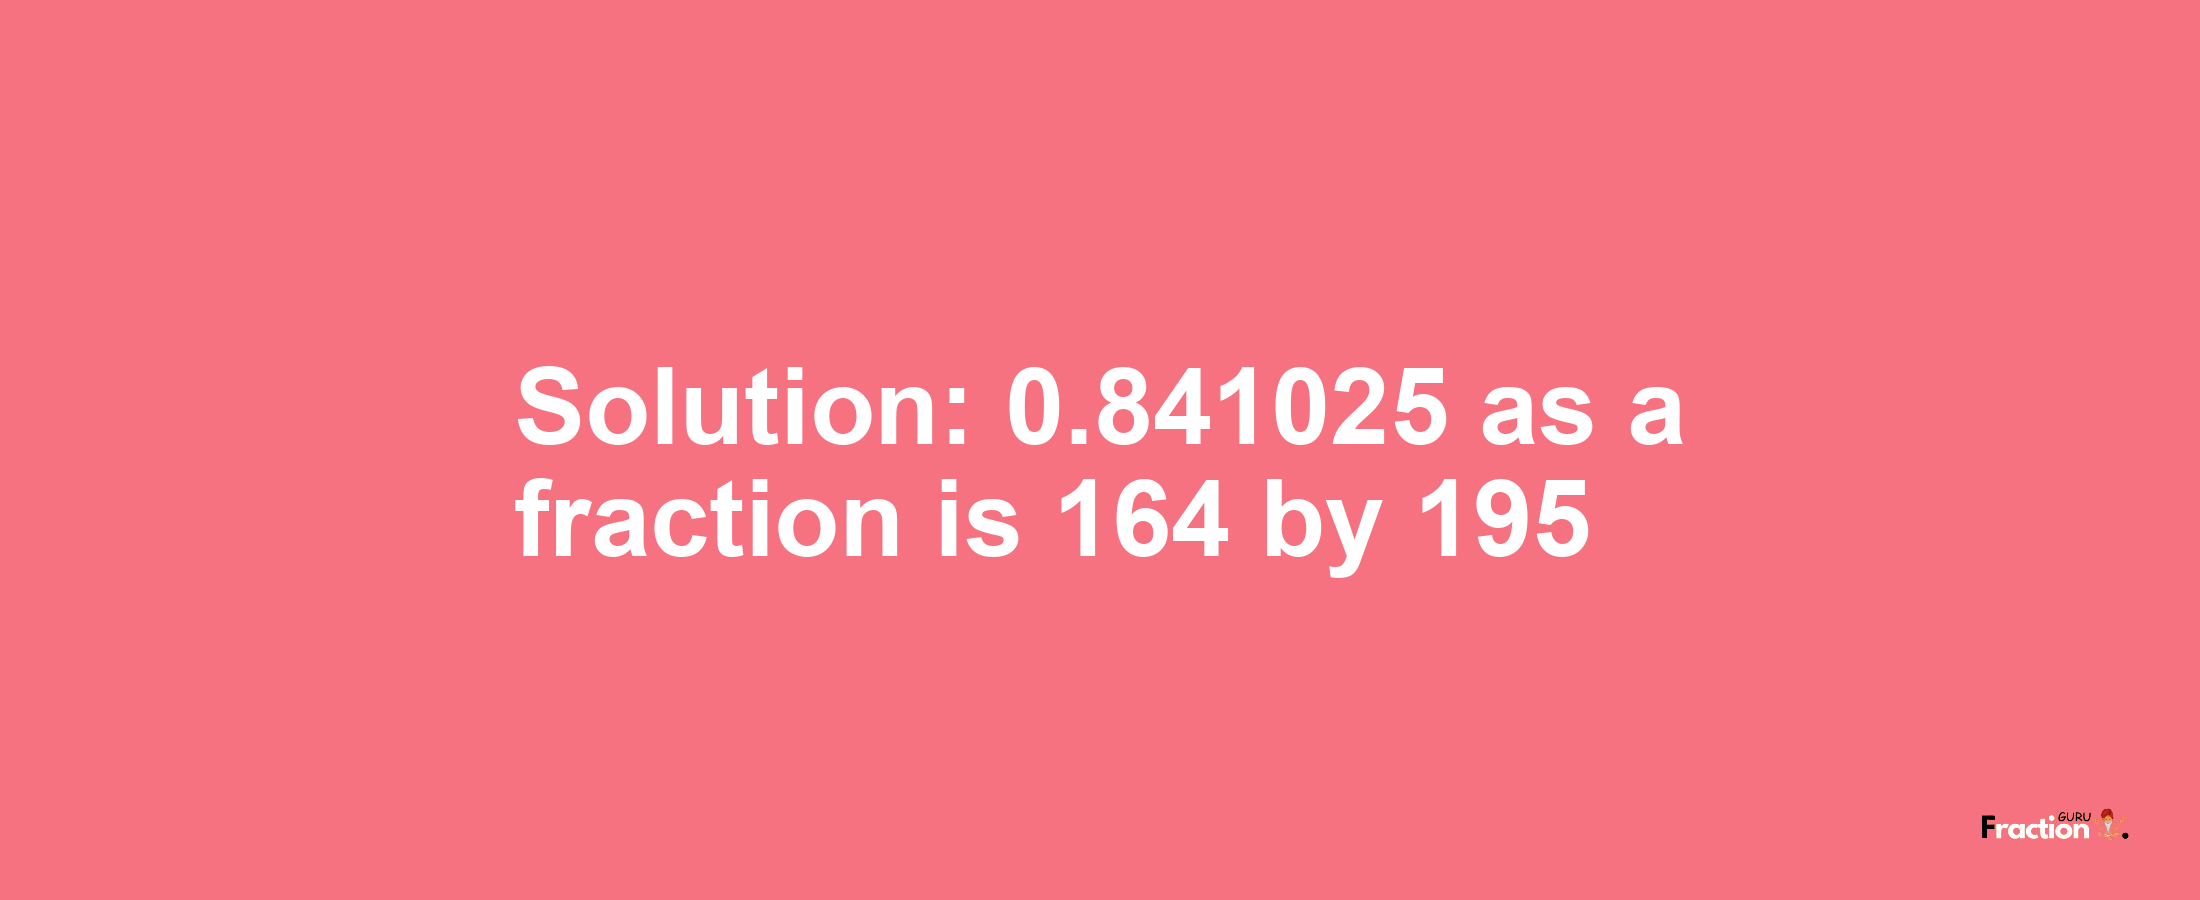 Solution:0.841025 as a fraction is 164/195